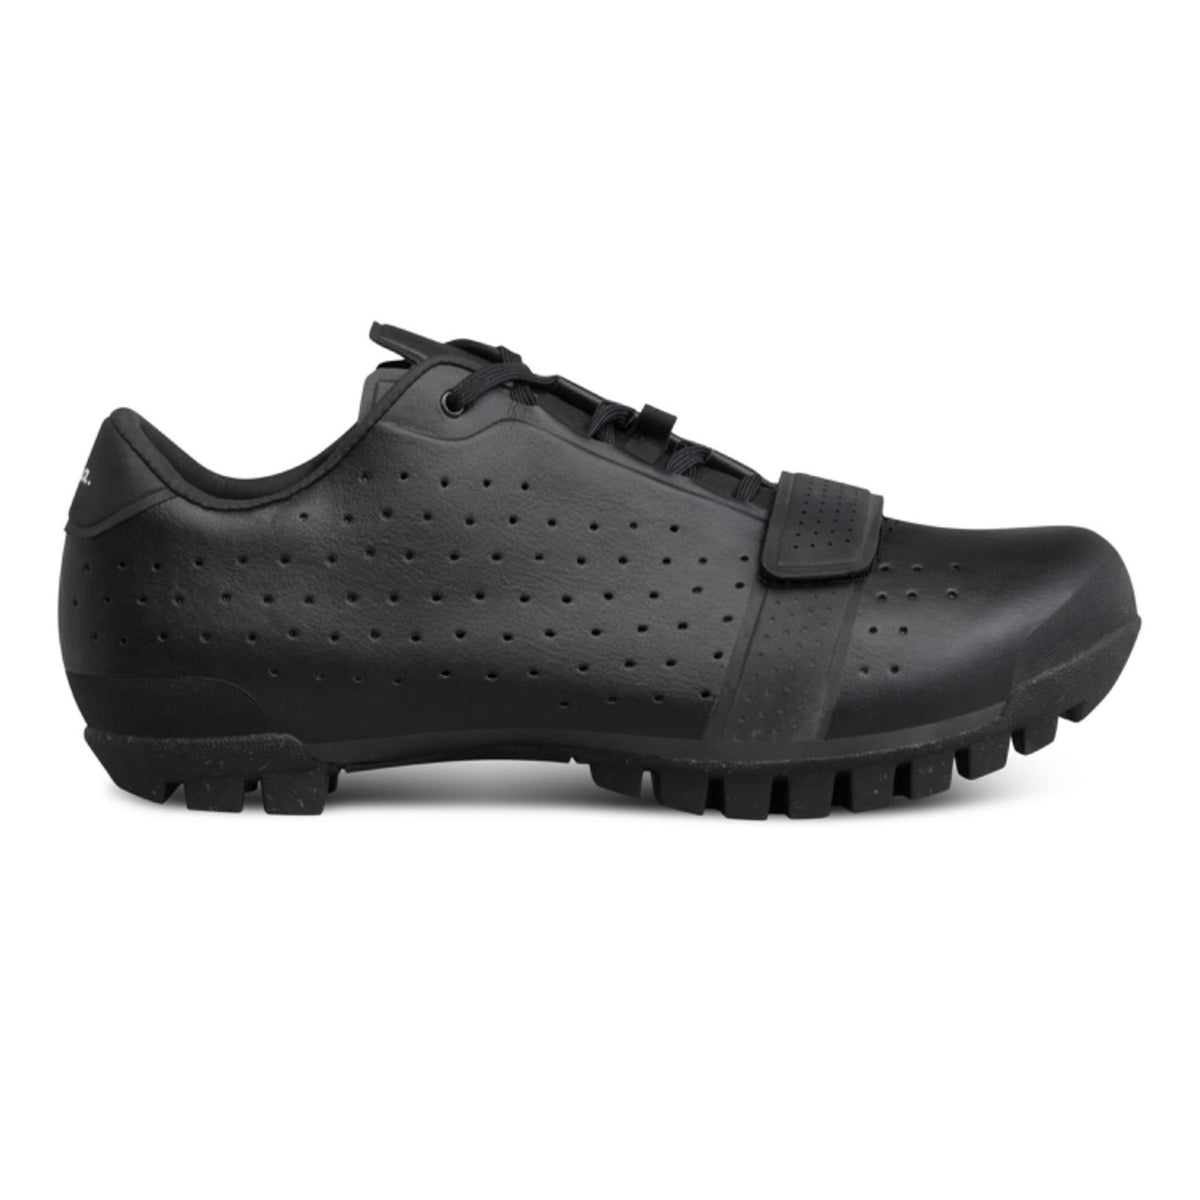 Hero image featuring a side angle shot of the Rapha Explore shoe in all black